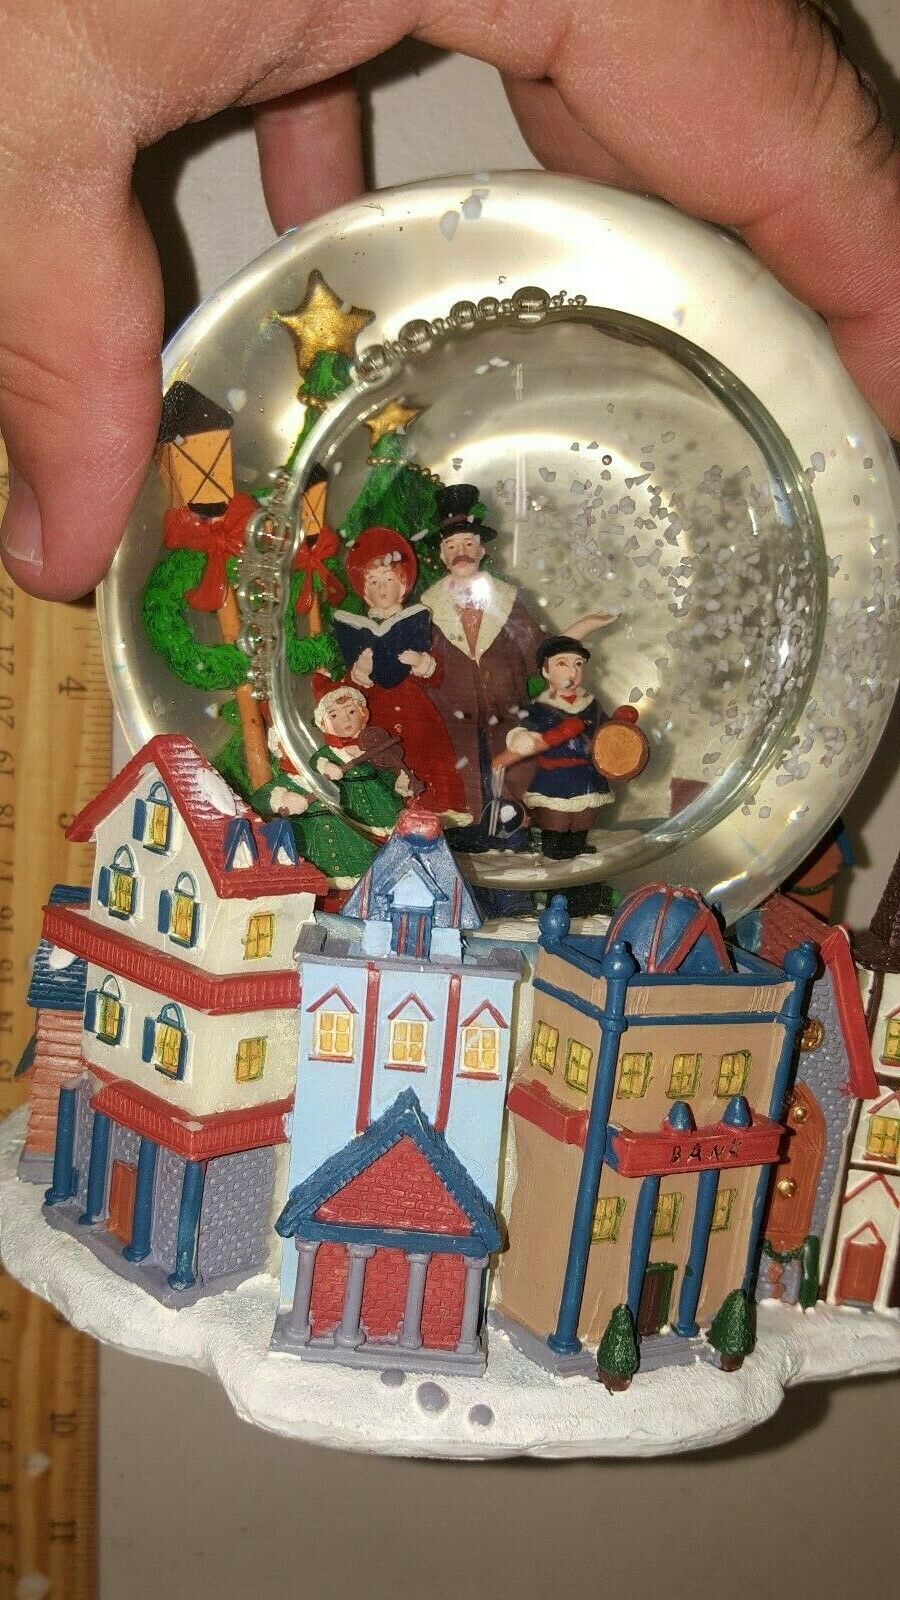 Snow Globe Old Village Christmas Theme Plays  "im Dreaming Of A White Christmas"